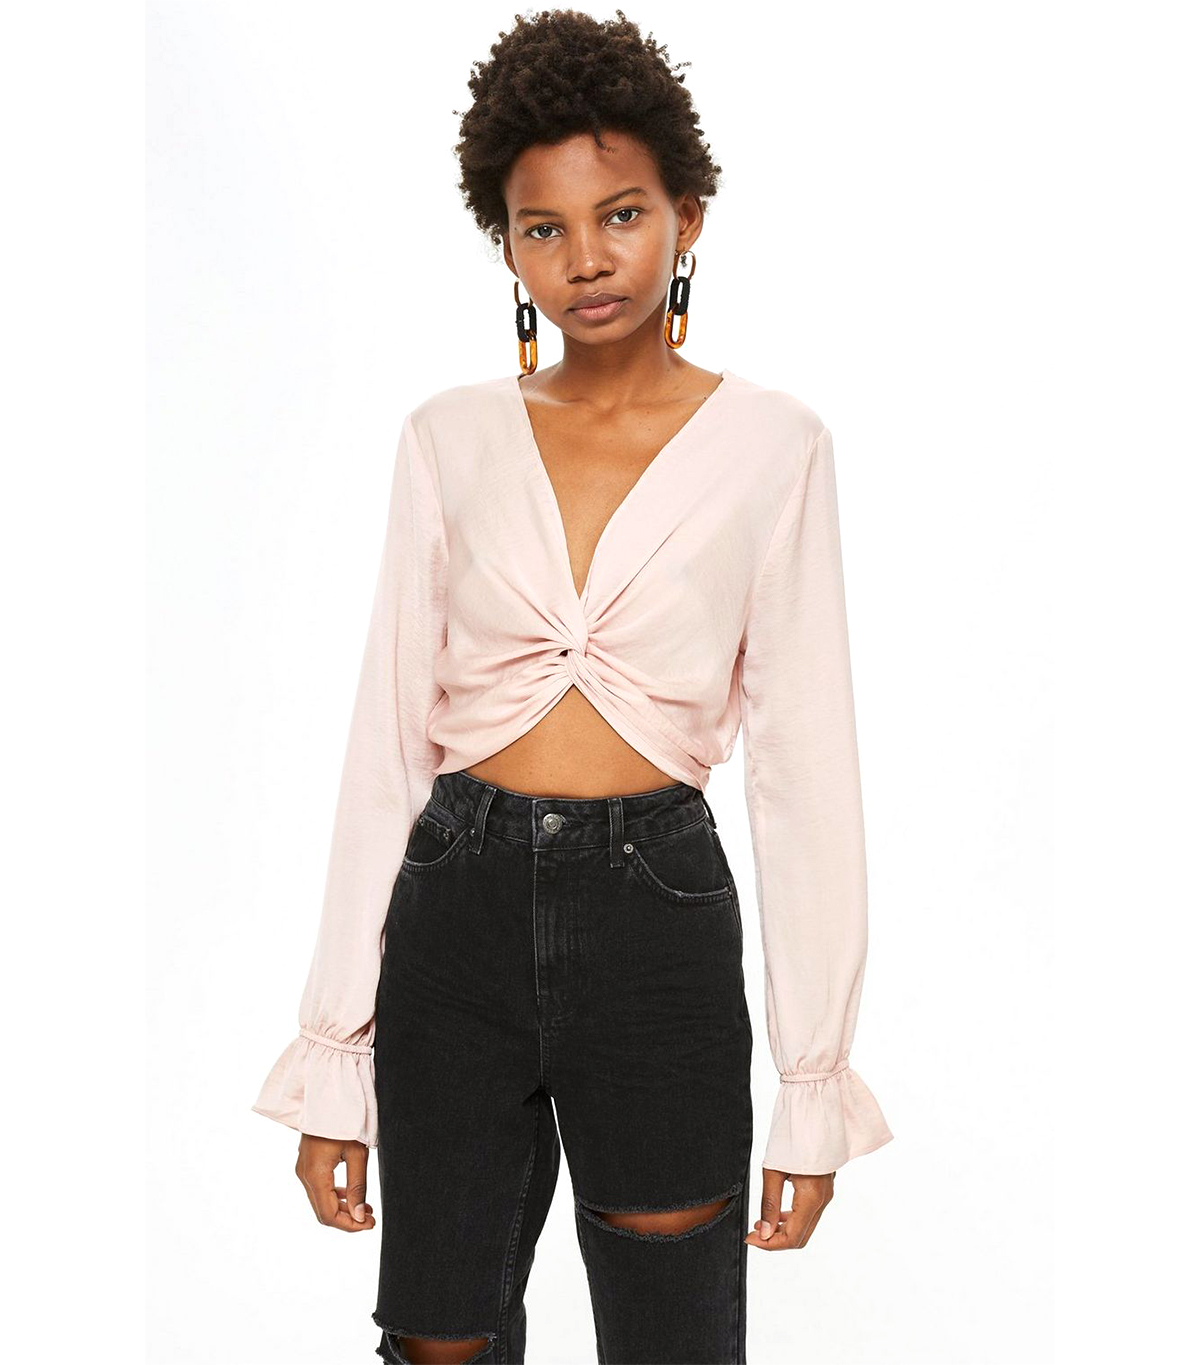 Orseund Iris Tops: Shop the Instagram-Famous Blouses | Who What Wear